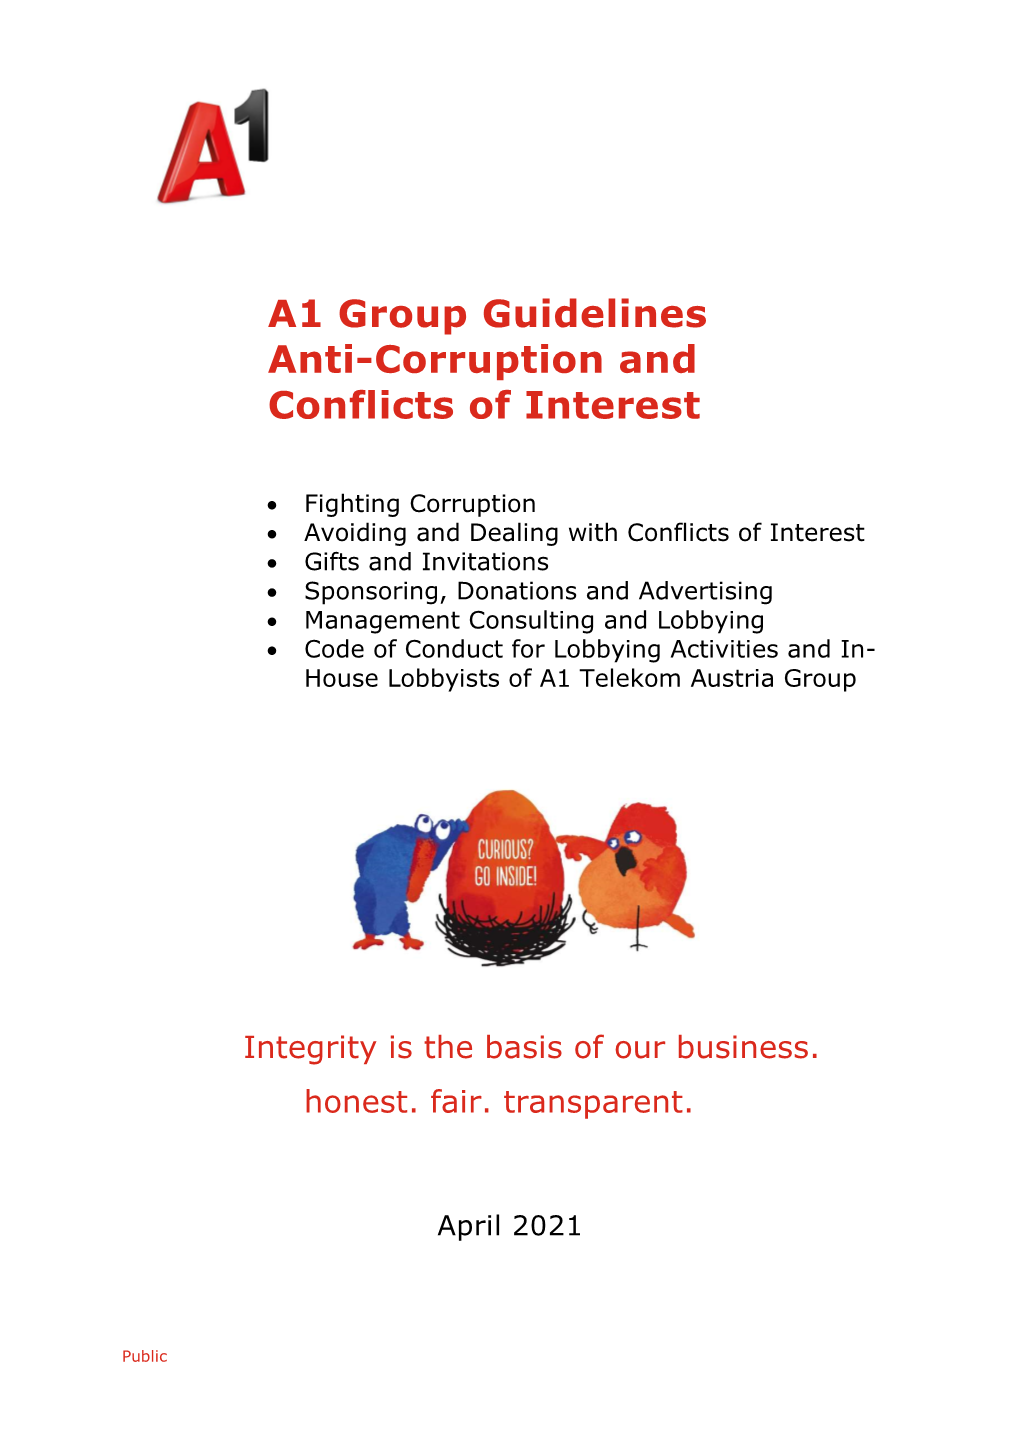 A1 Group Guidelines Anti-Corruption and Conflicts of Interest